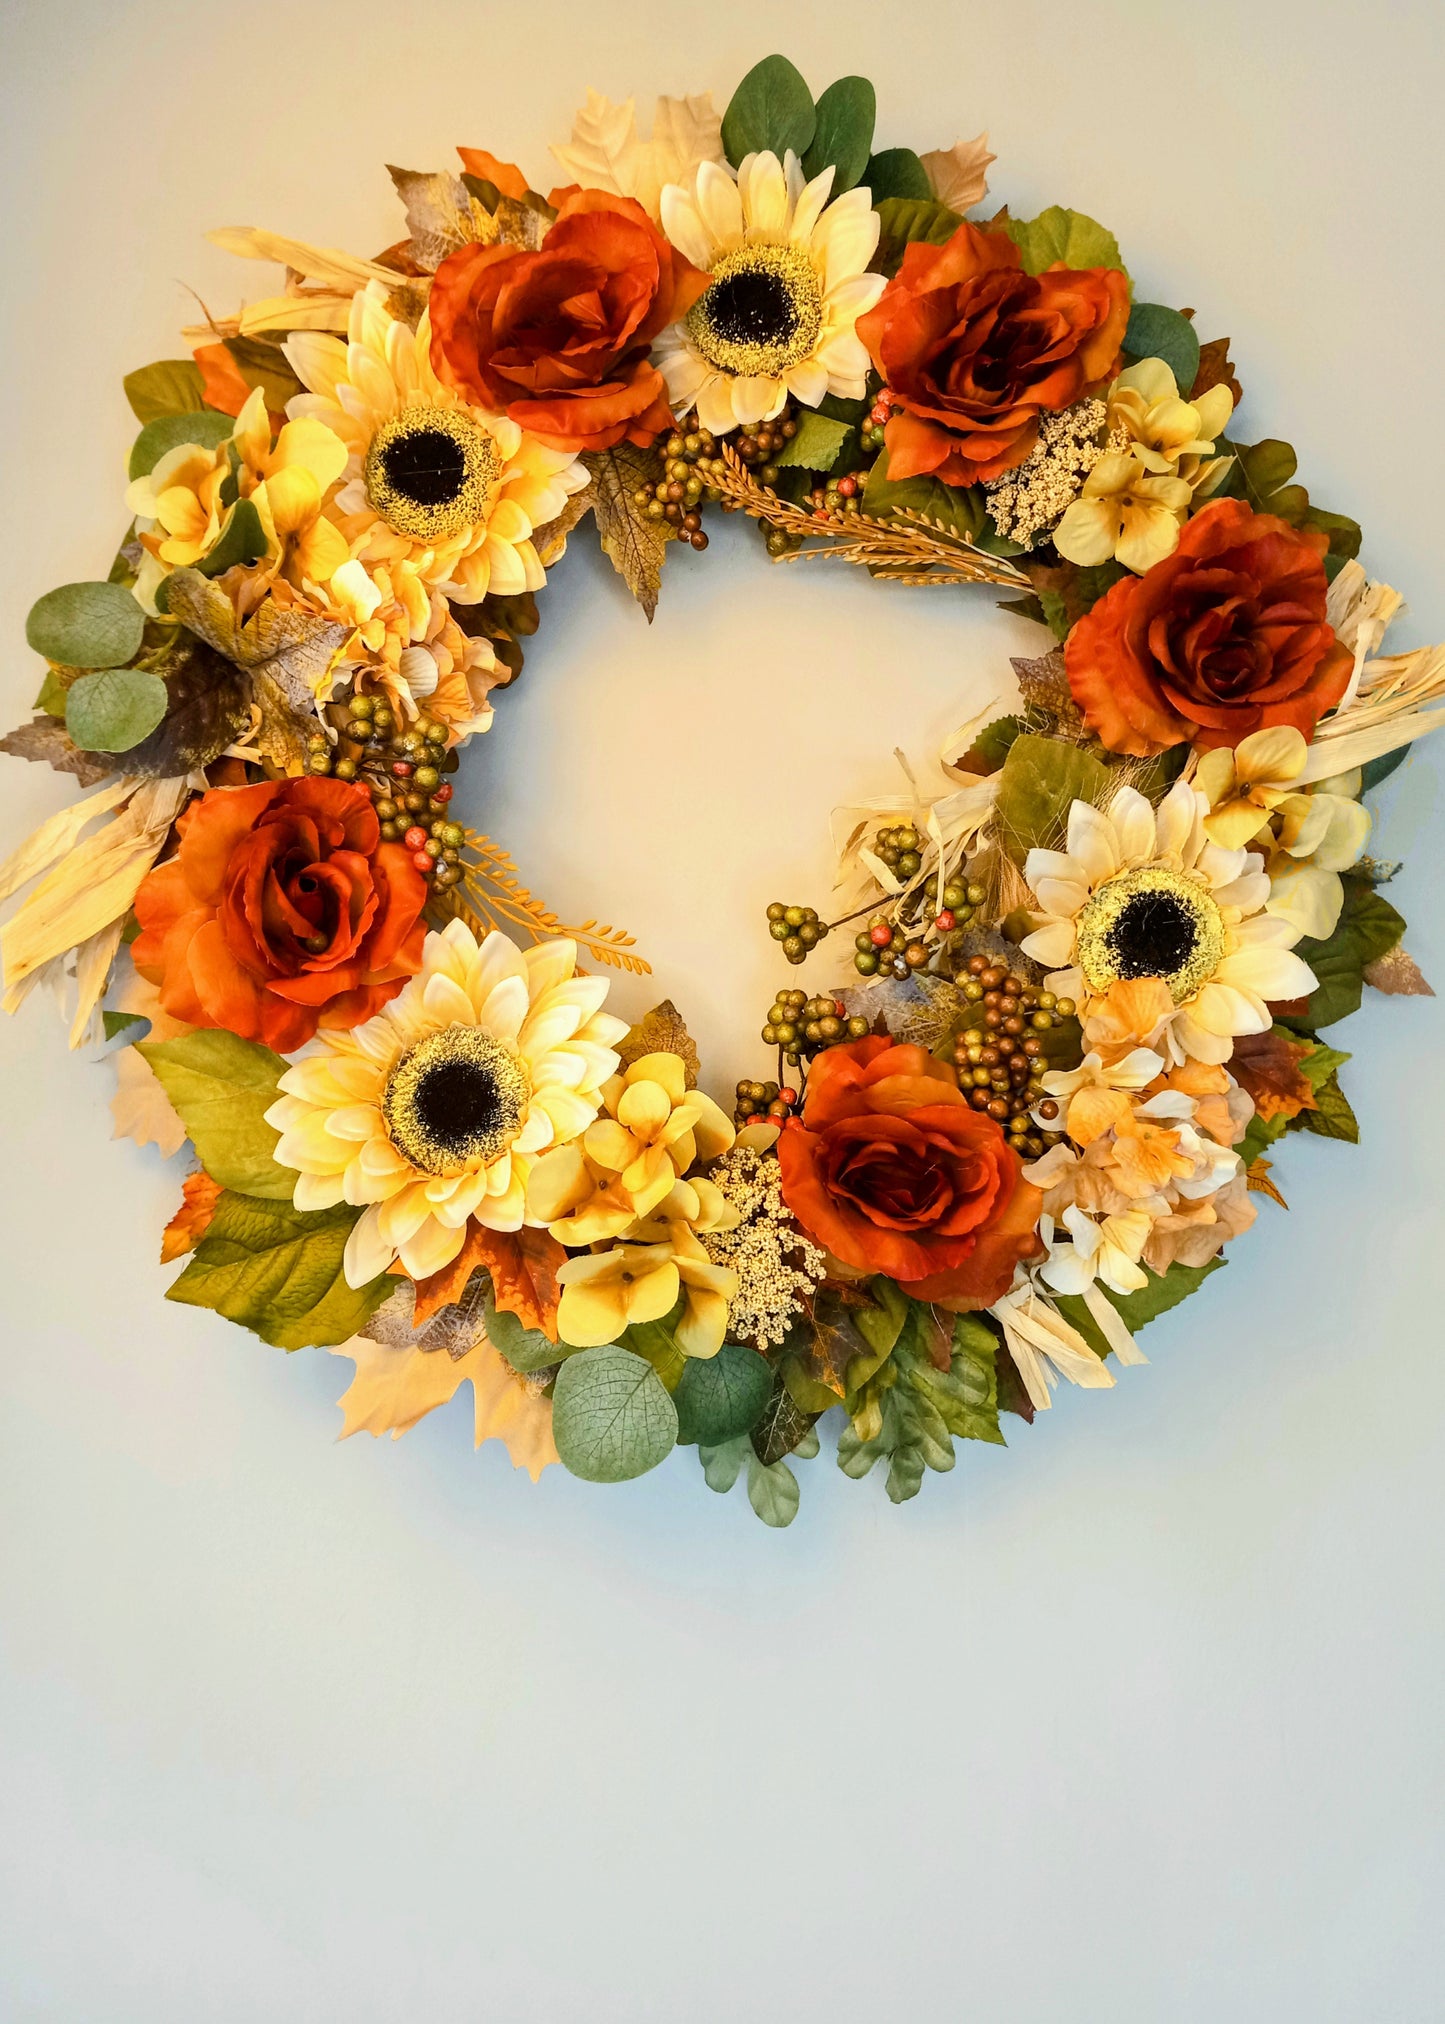 Fall Sale! Rustic Rose and Sunflower Fall Wreath